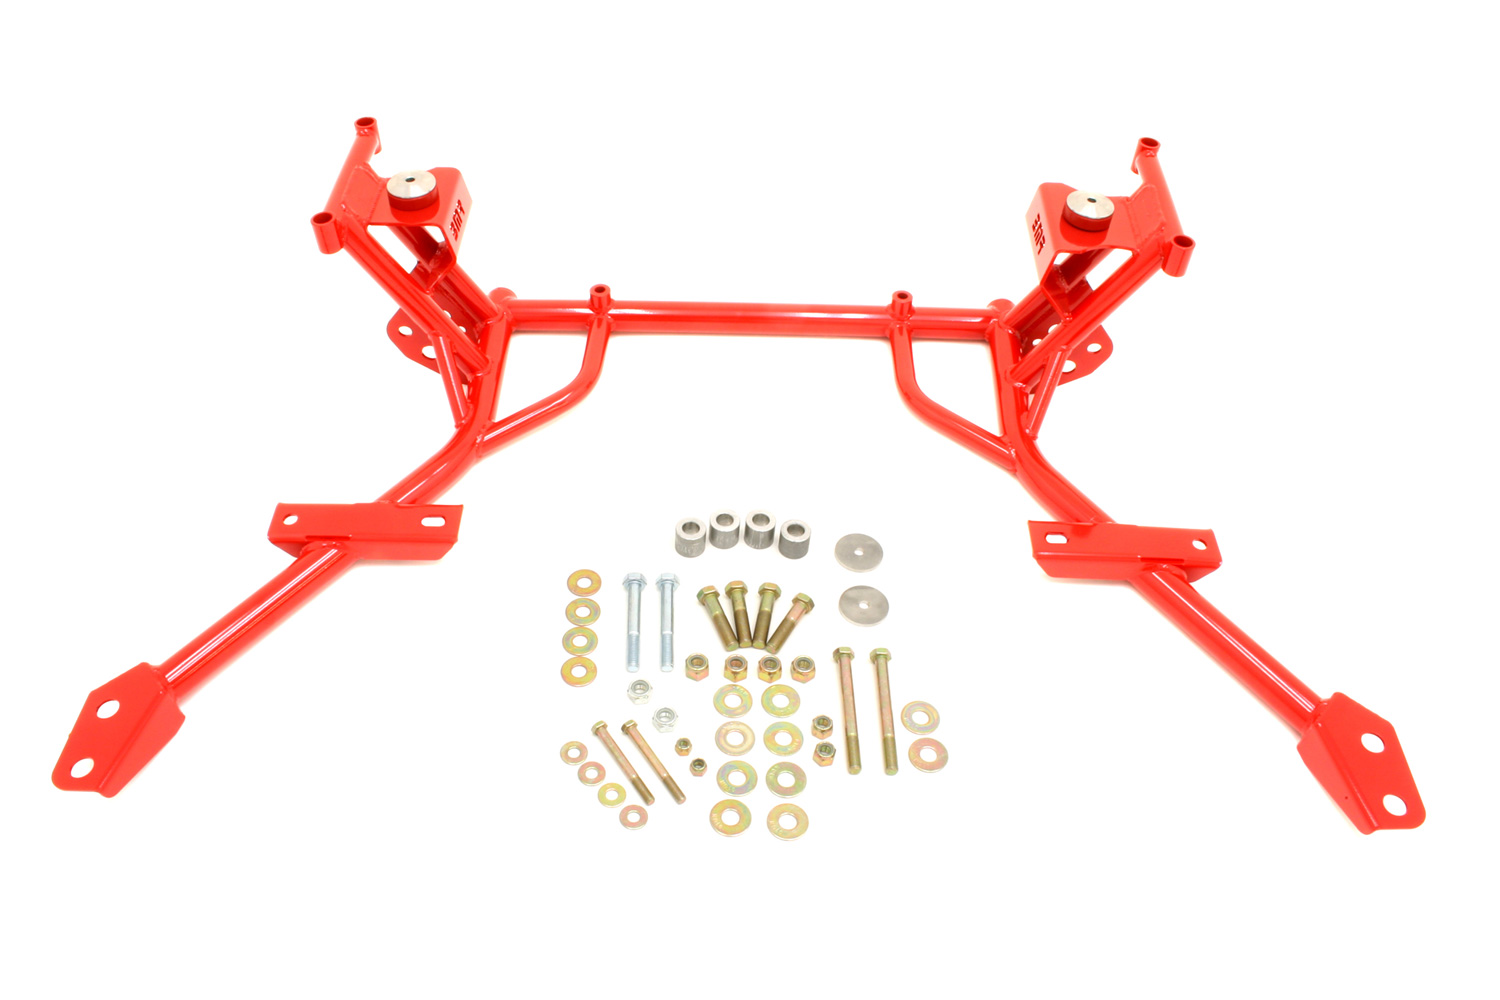 2005+ Ford Mustang BMR Fabrication Tubular K-Member - OE Power Rack (Not for use on GT500)